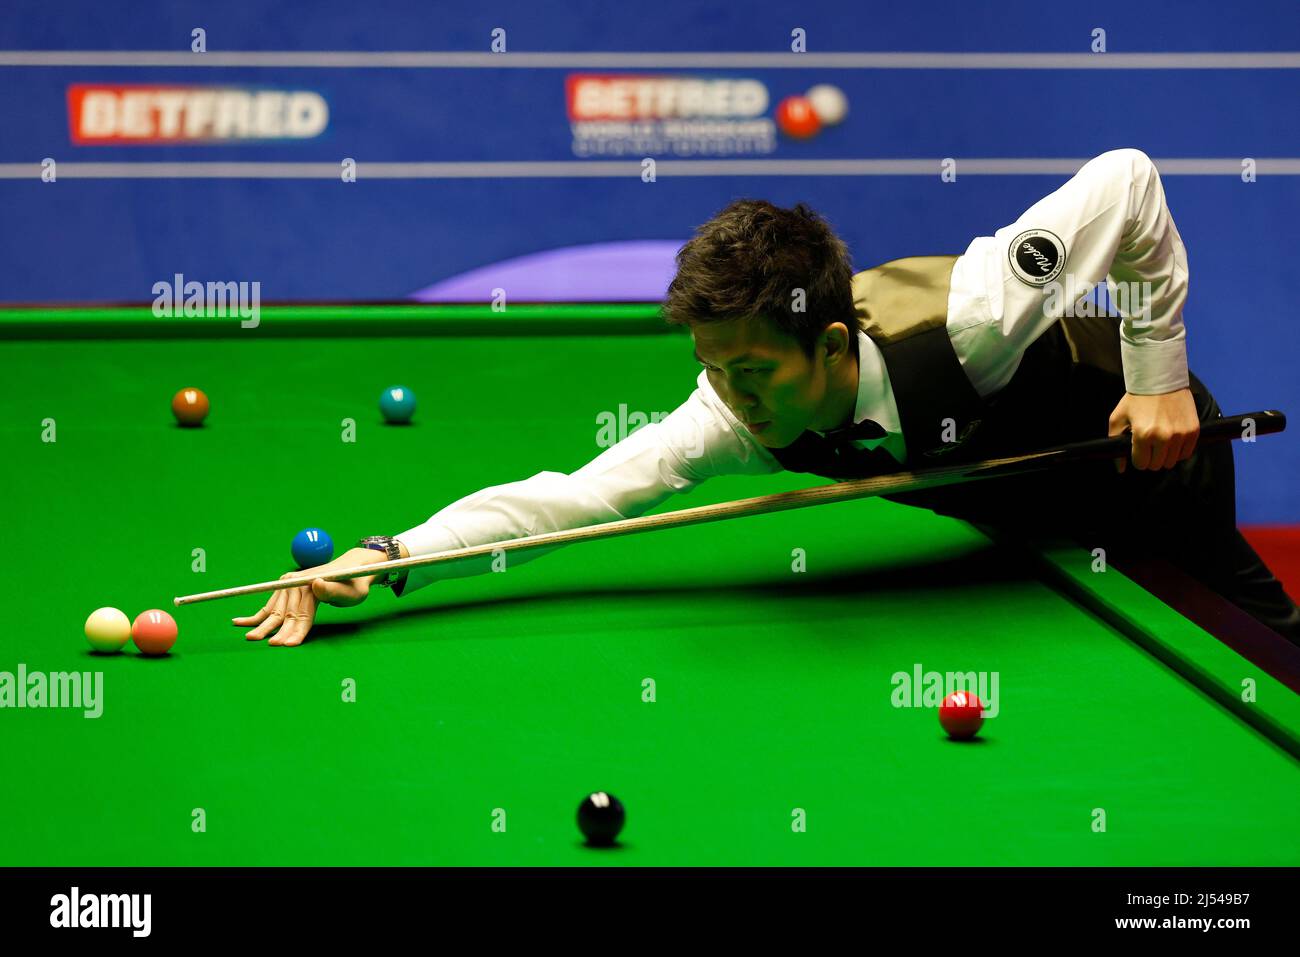 Thepchaiya Un-Nooh during day five of the Betfred World Snooker Championships at The Crucible, Sheffield